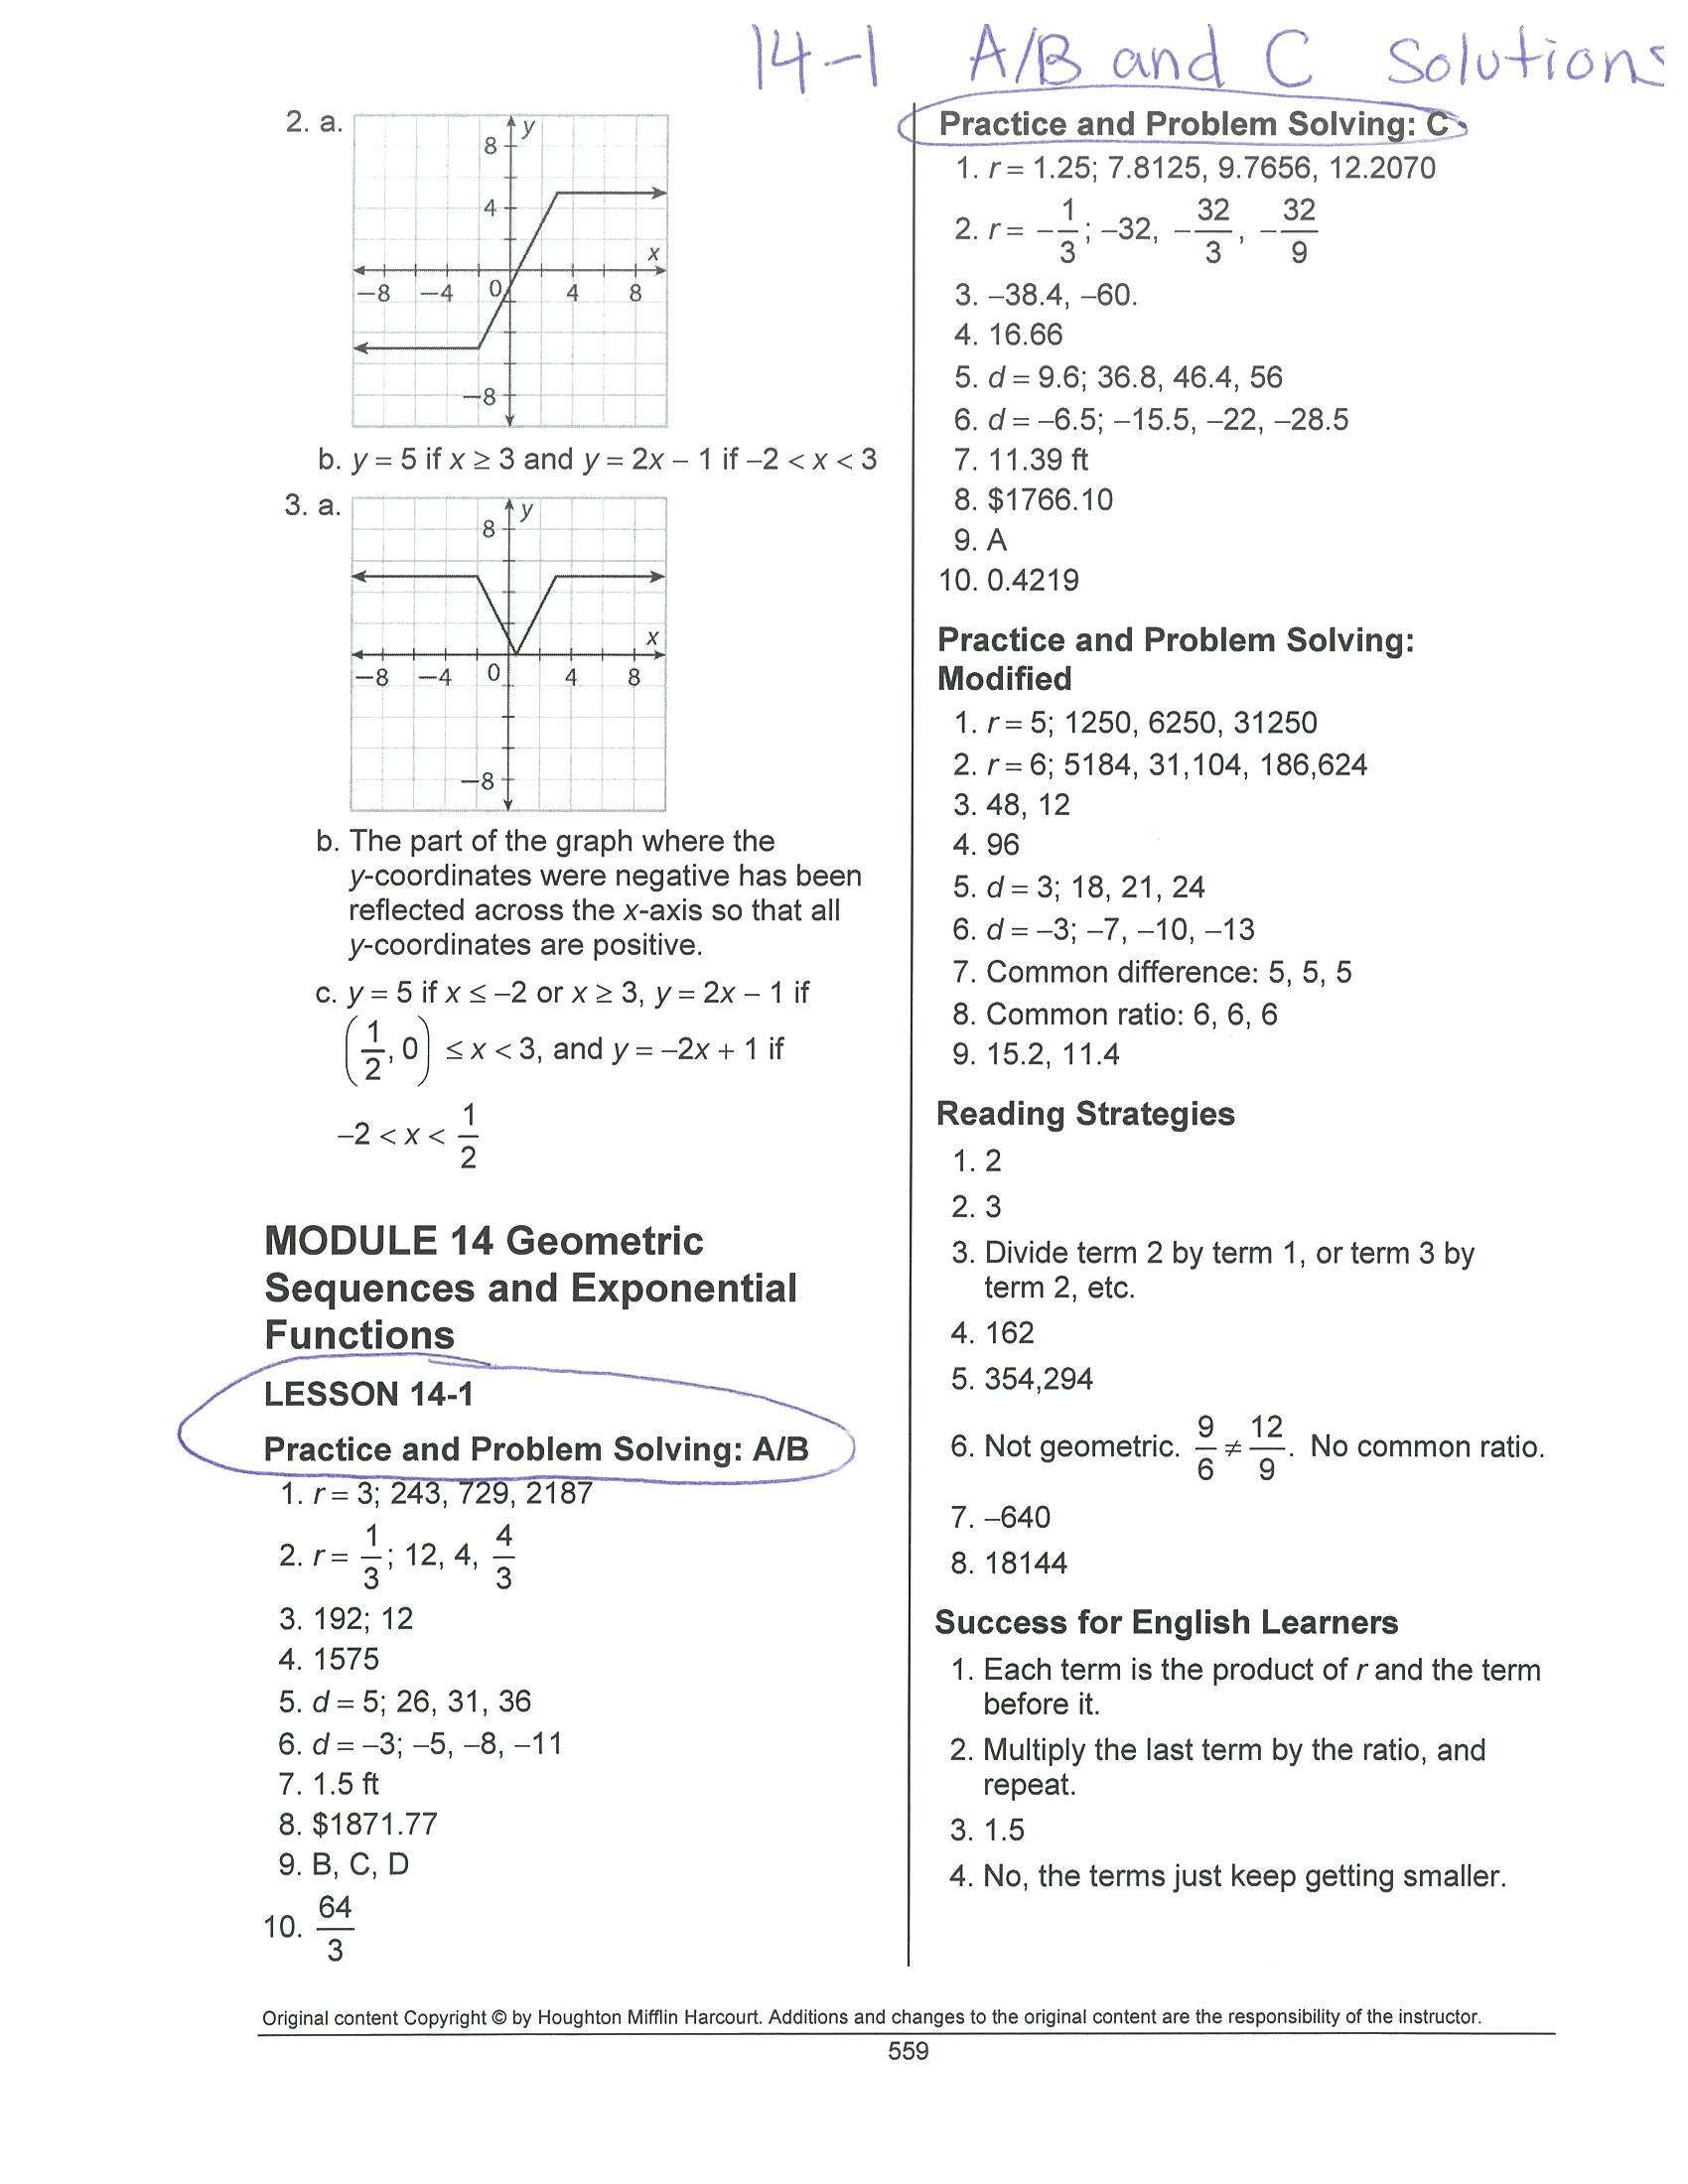 Math Models Worksheet 41 Relations And Functions Answers